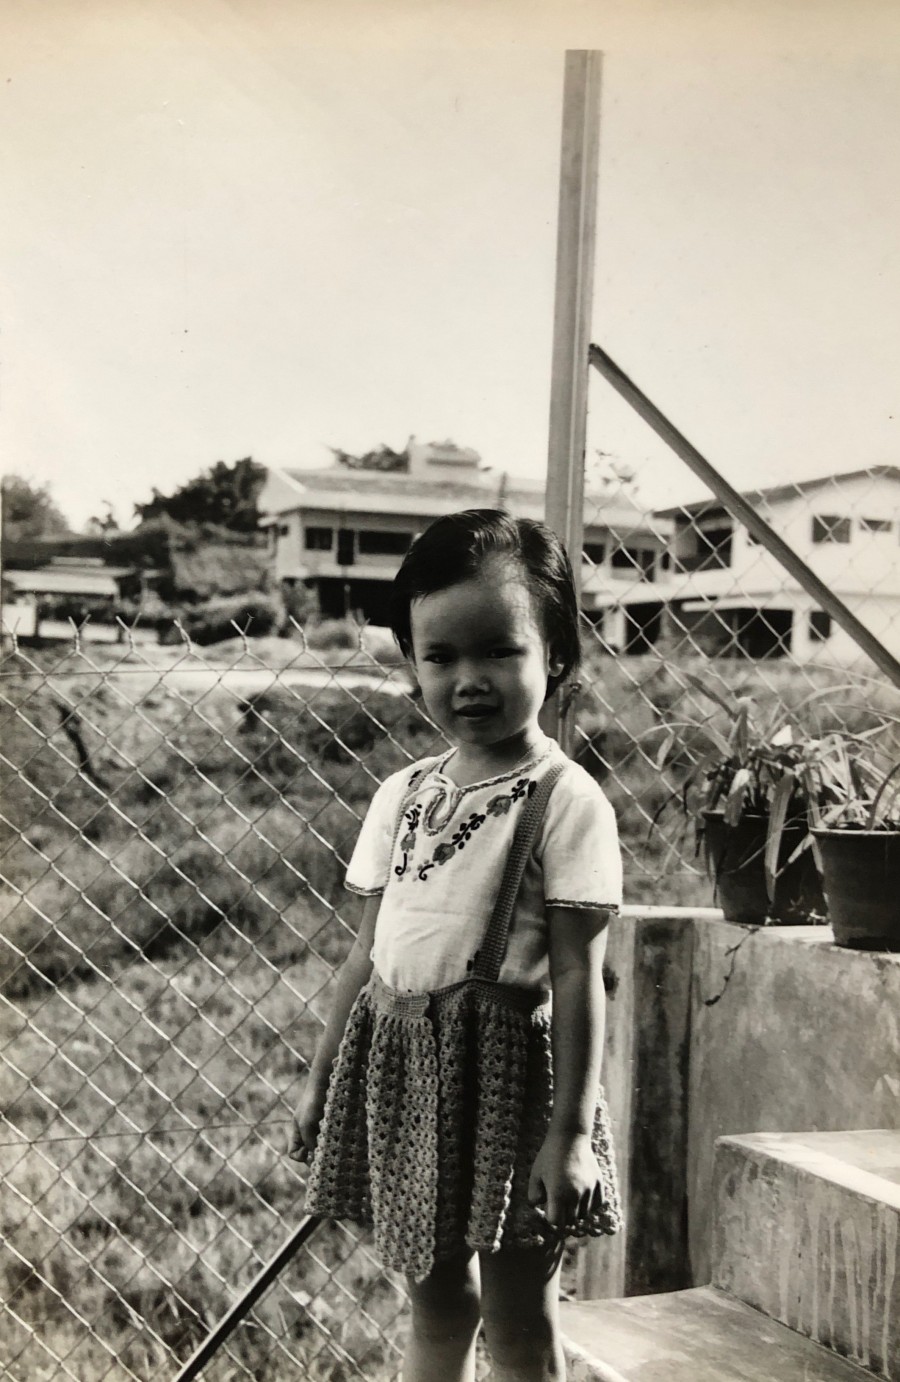 Li-Chuen - Pre 1977. At the back of our house in Jalan Pantai (Kuala Lumpur), just before emigrating to Australia